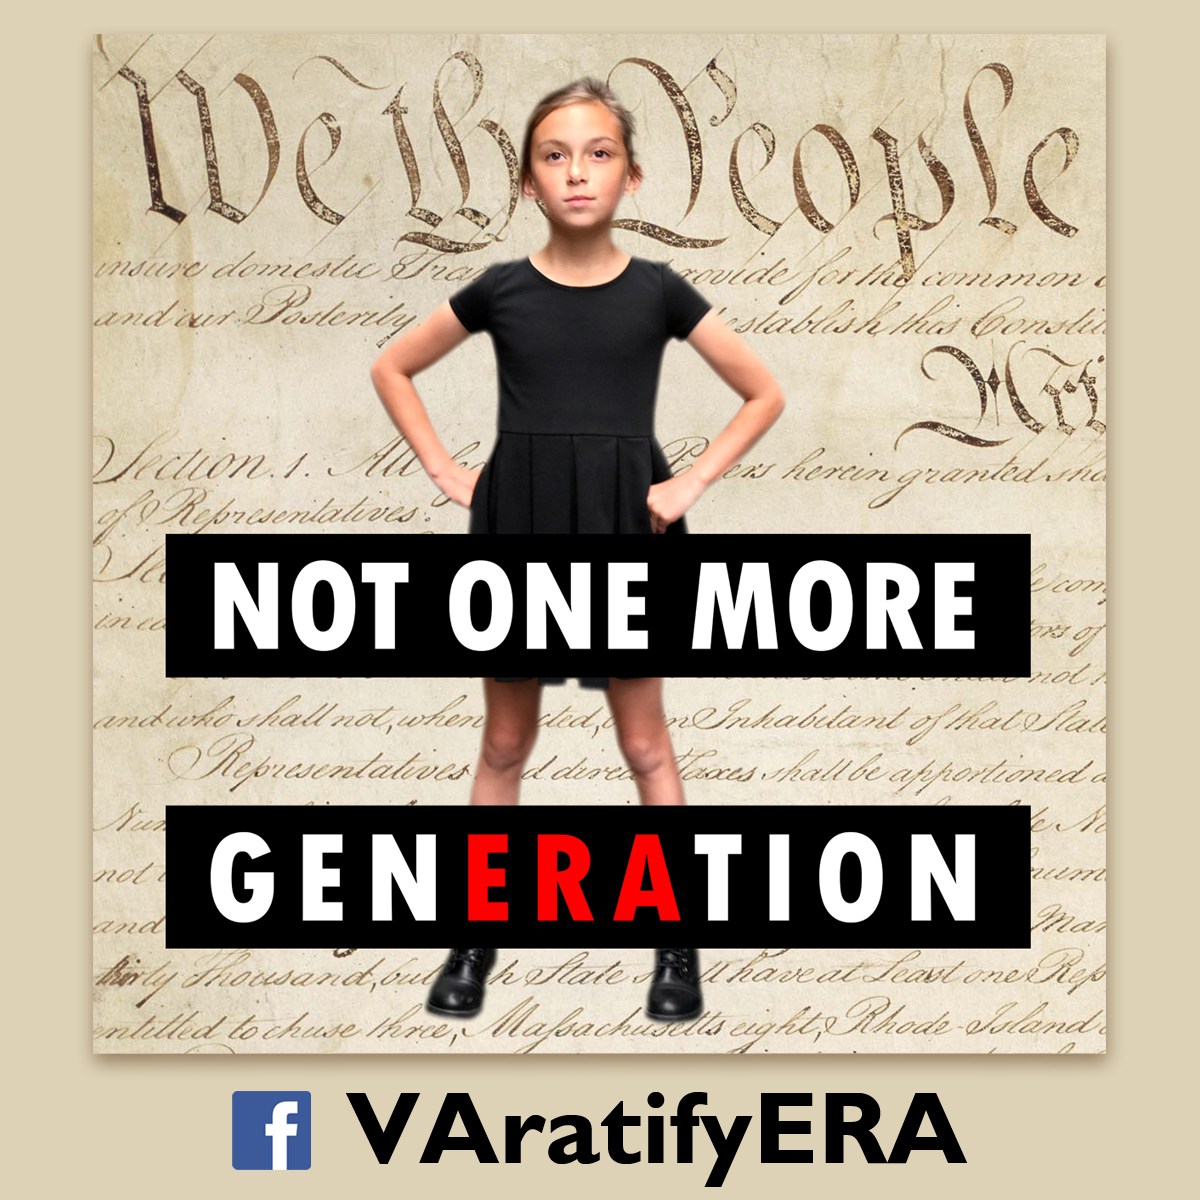 A poster from the "VA ratify ERA" campaign. A group of Virginians are promoting the ratification of the Equal Rights Amendment. Photo courtesy: Kati Hornung/Varatifyera.org